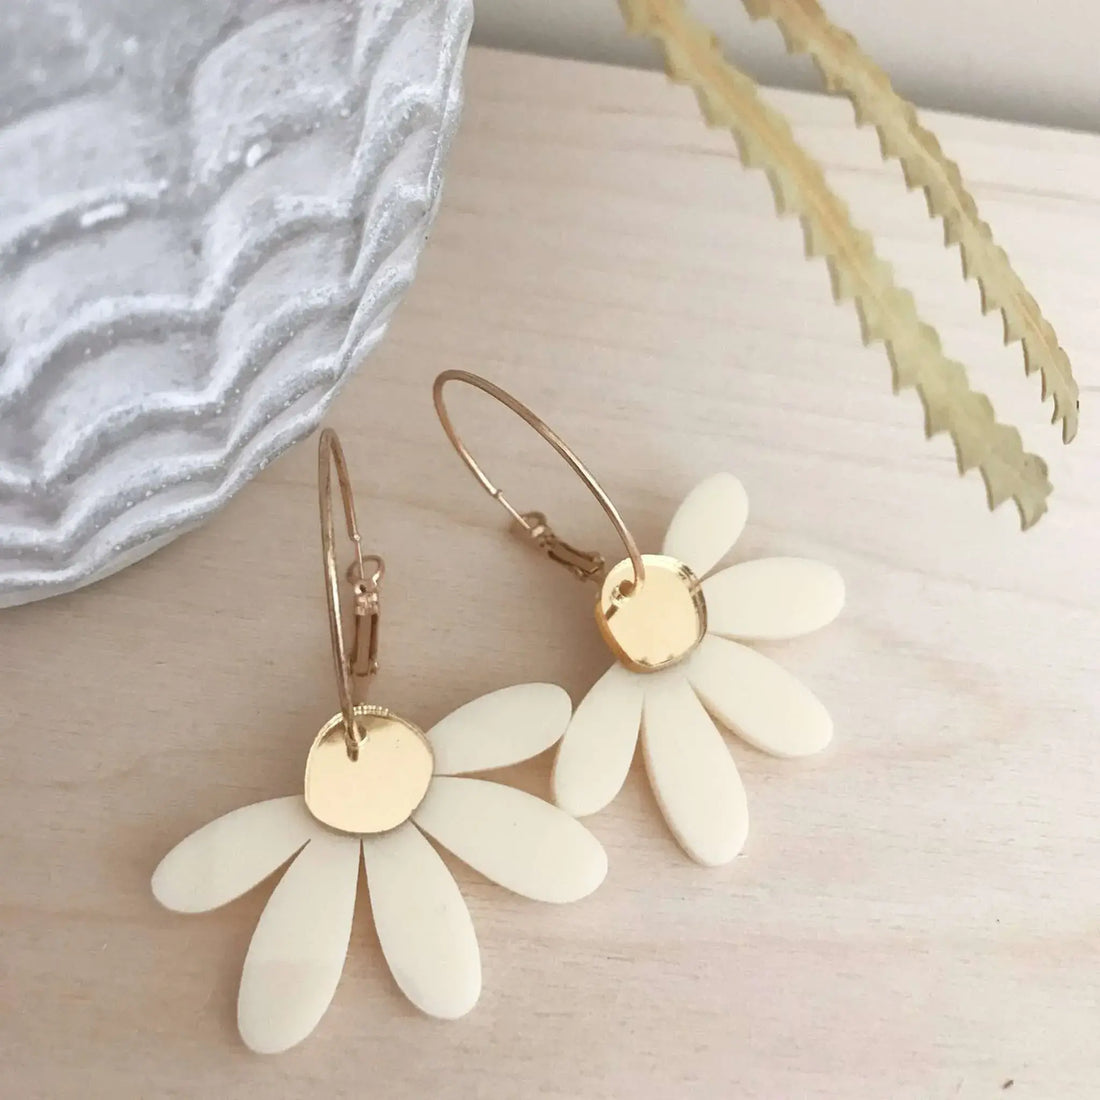 Jumbo Daisy Hoop Earrings in Cream &amp; Gold by Foxie Collective